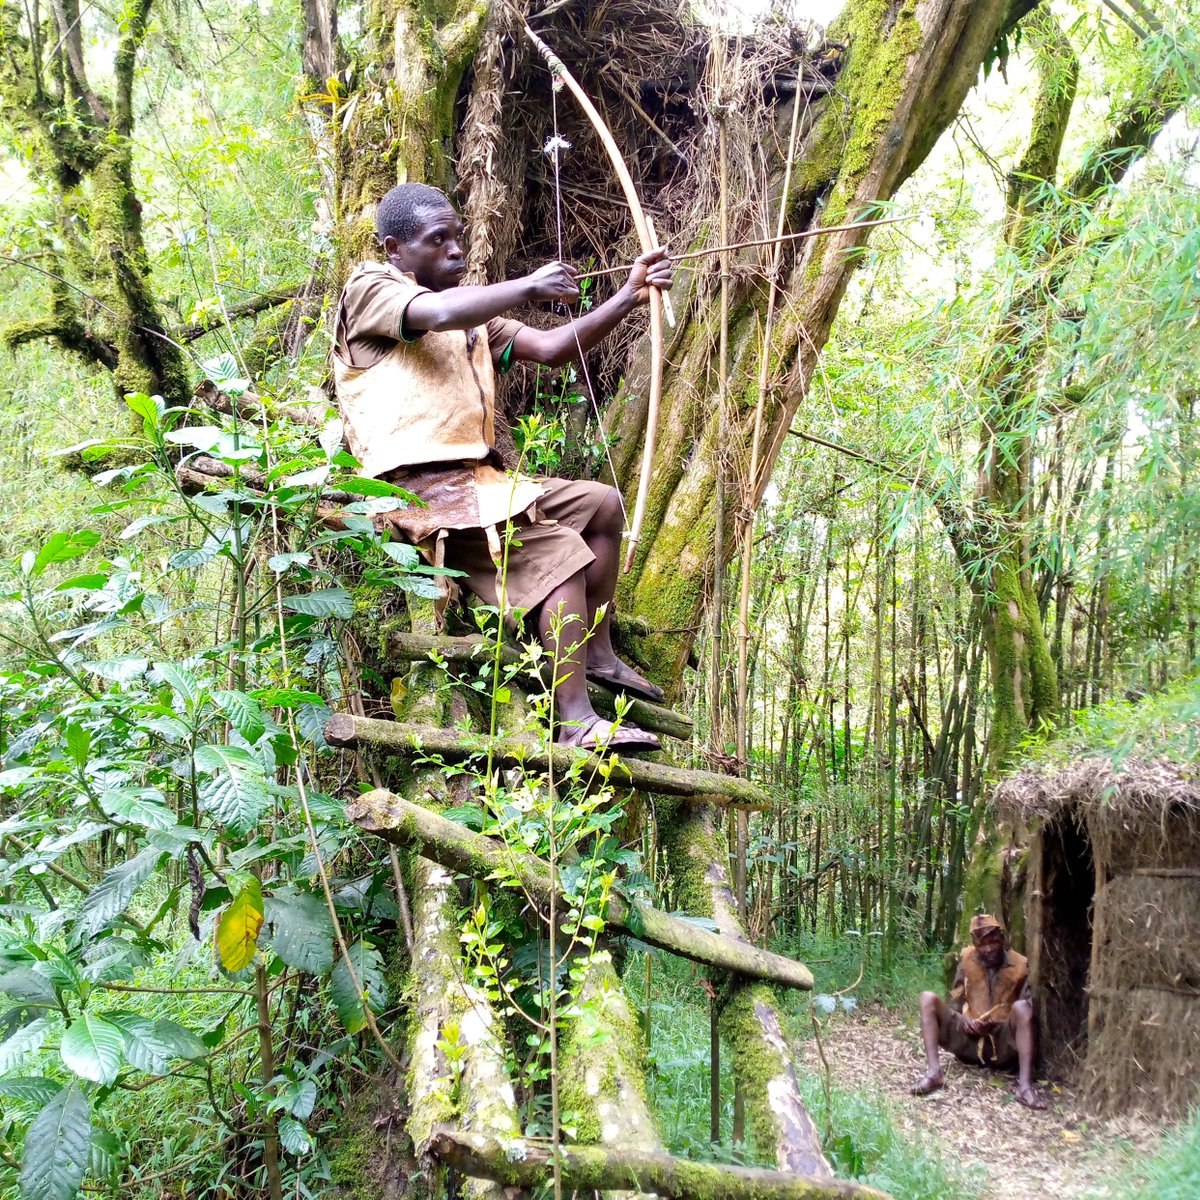 Kisoro has one of the indigenous tribe of the Batwa. The Batwa trail journeys you to the life they lived before their relocation from the Park. Miss not the Ngarama cave which is believed to be where their leader stayed. #IndigenousPeoples #adventure #culture . Book your Tour.